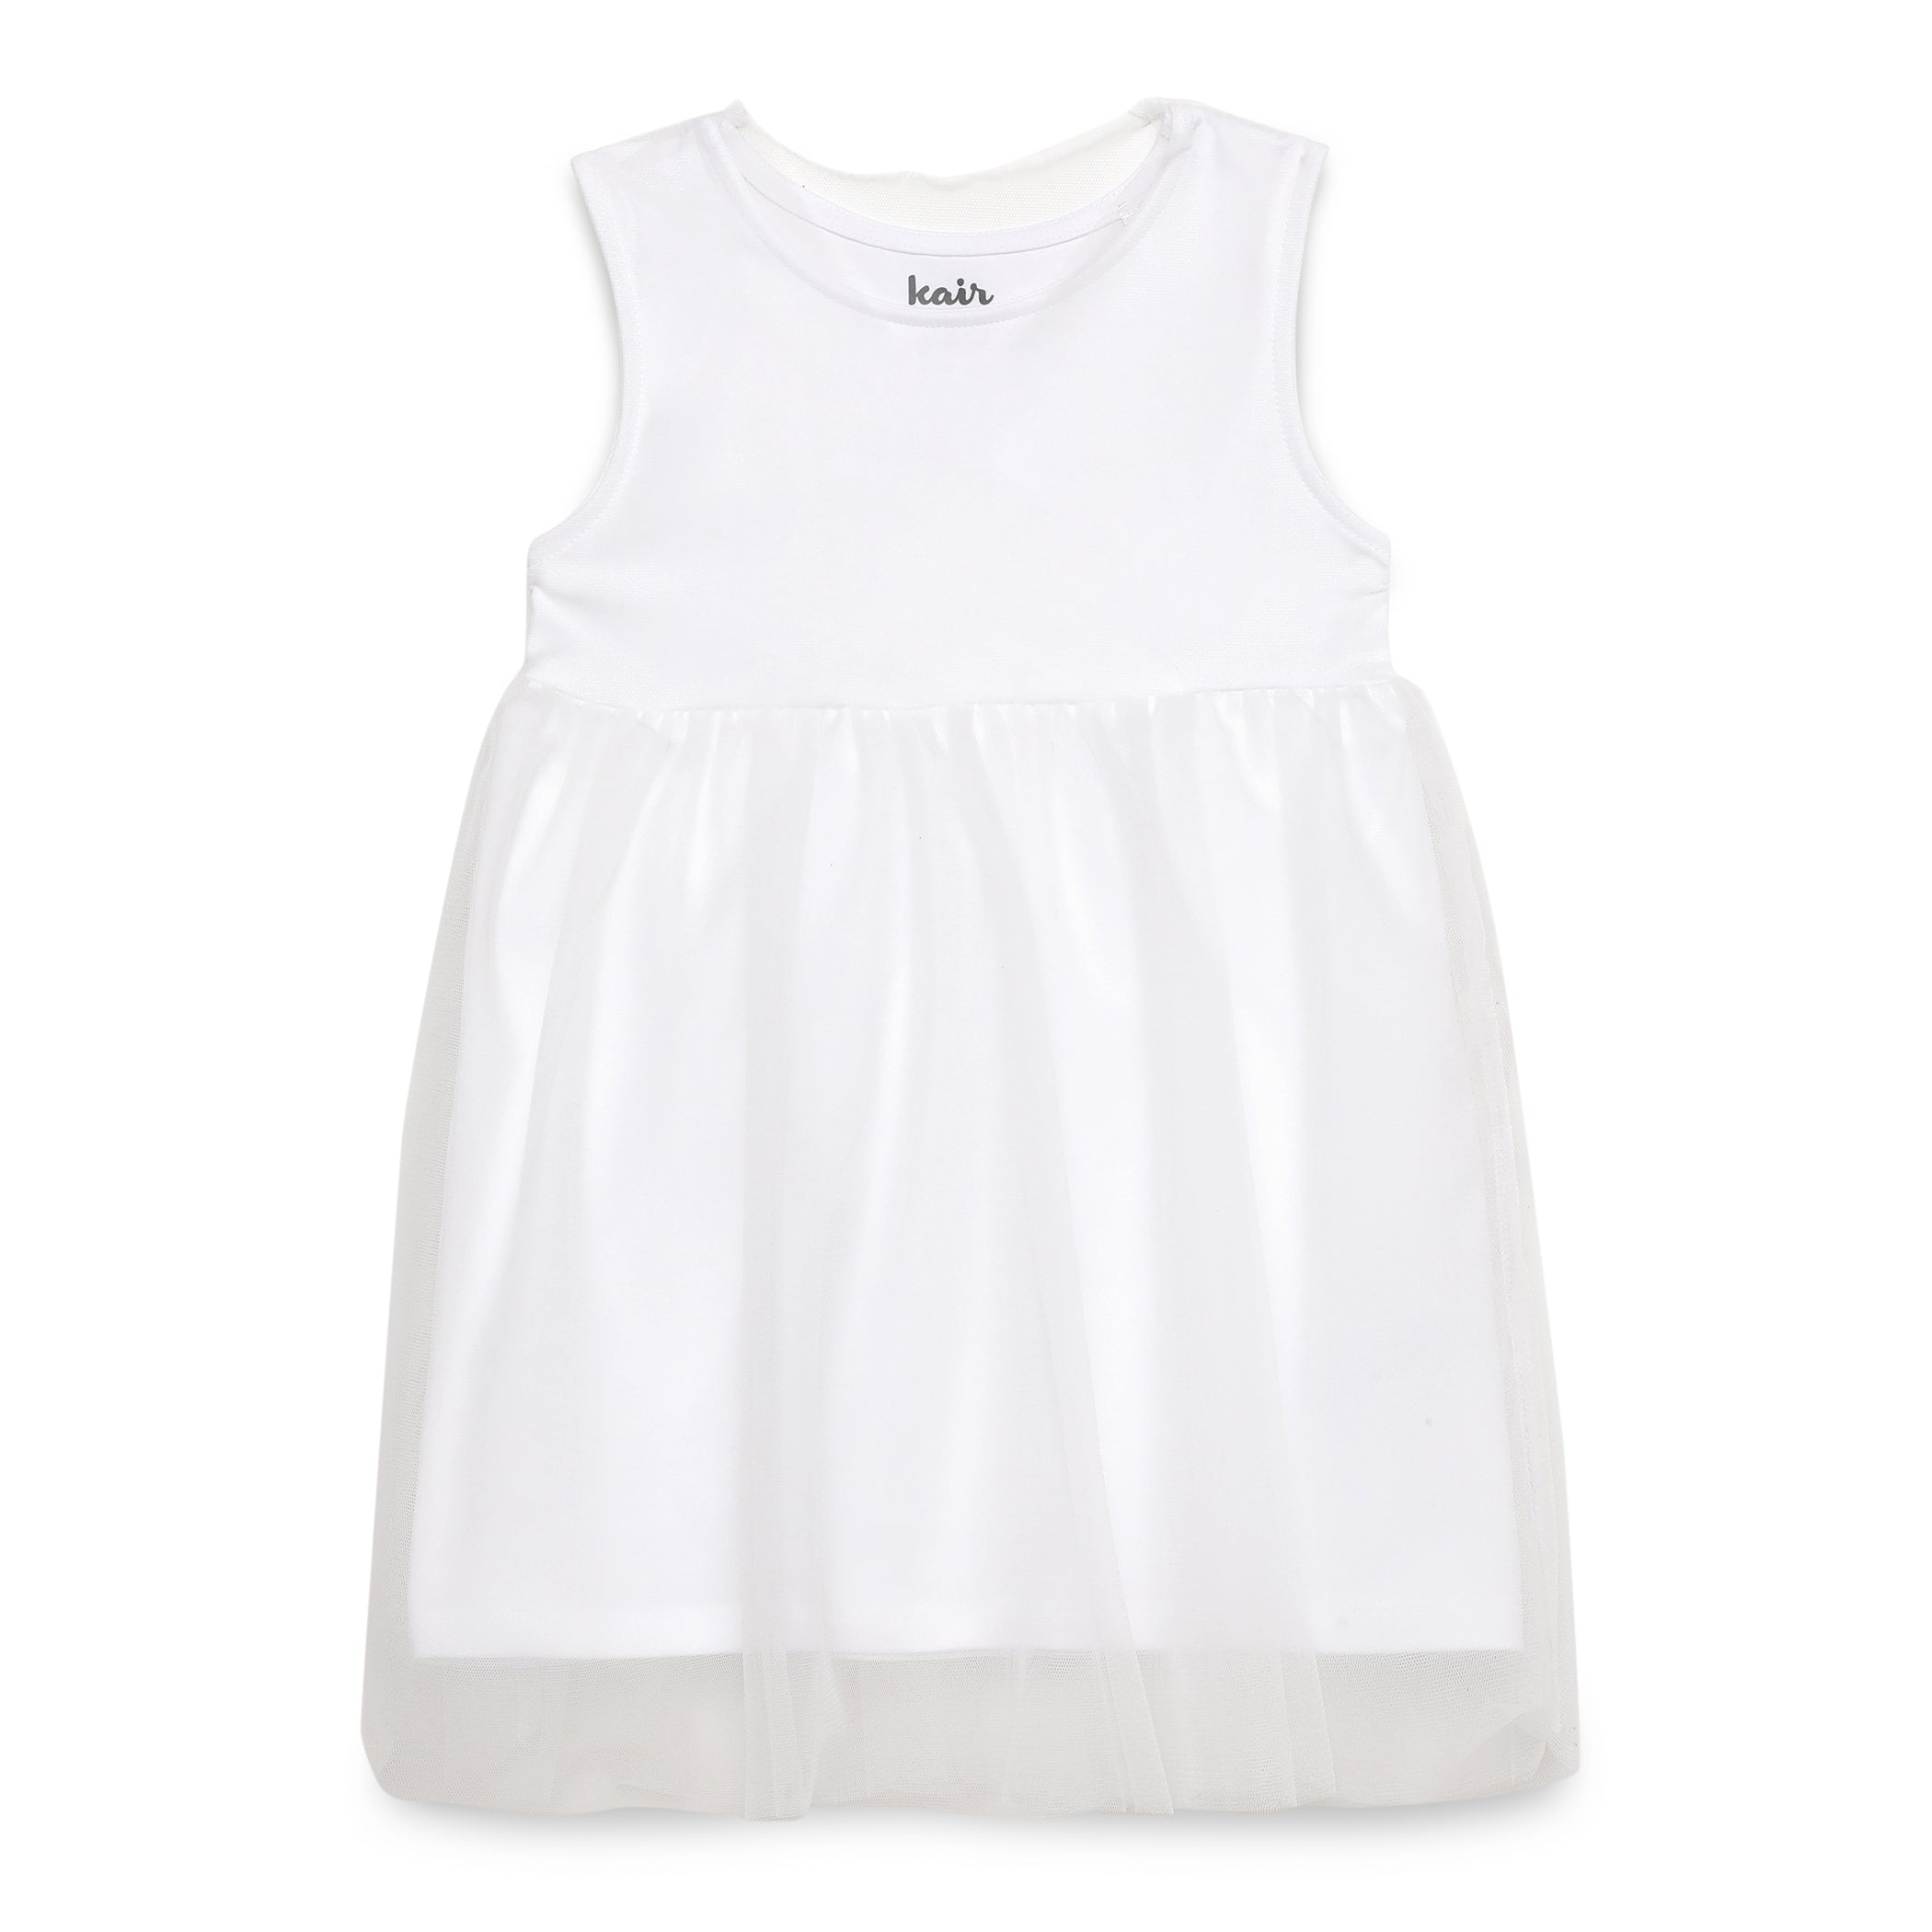 Baby Girls Decorative White Party Dress